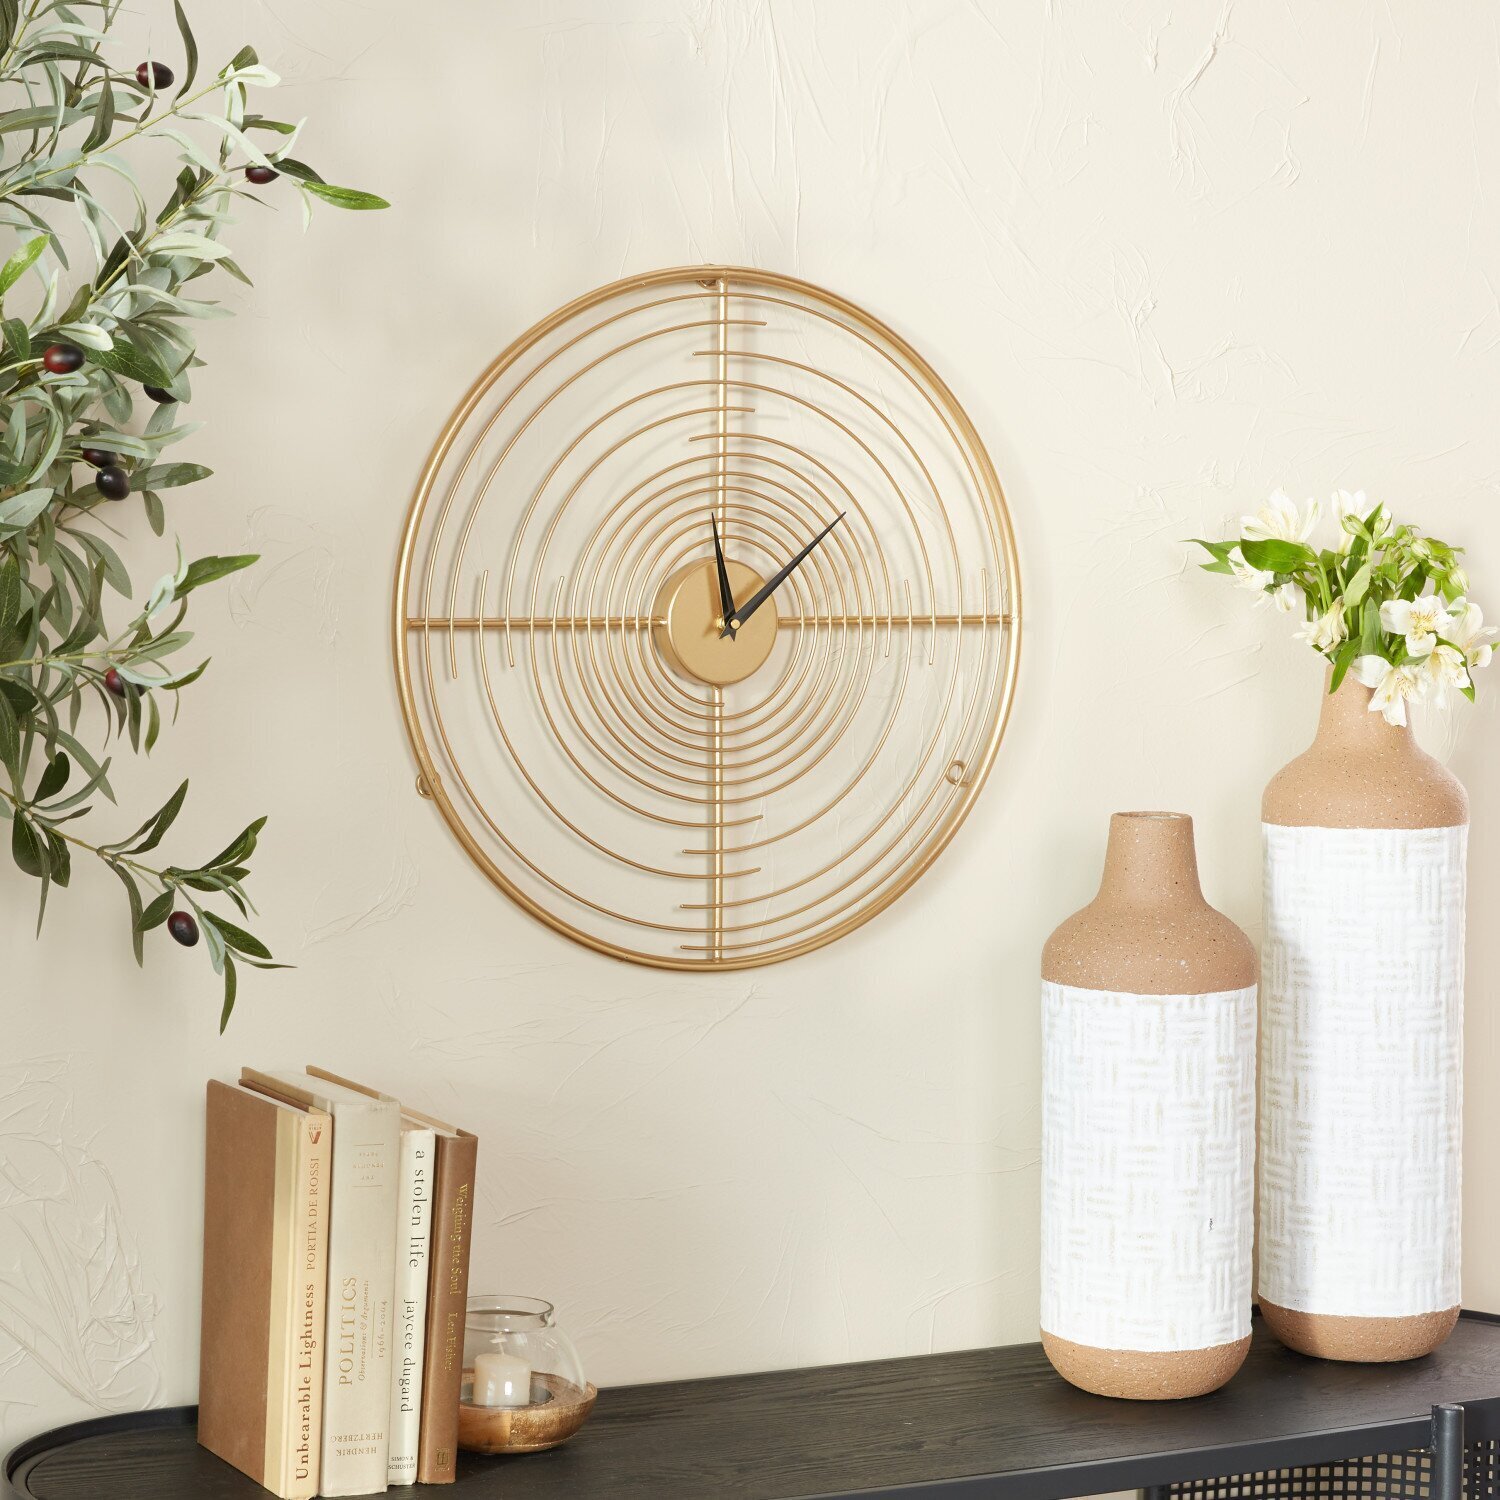 Iron Wall Clock Without Numbers